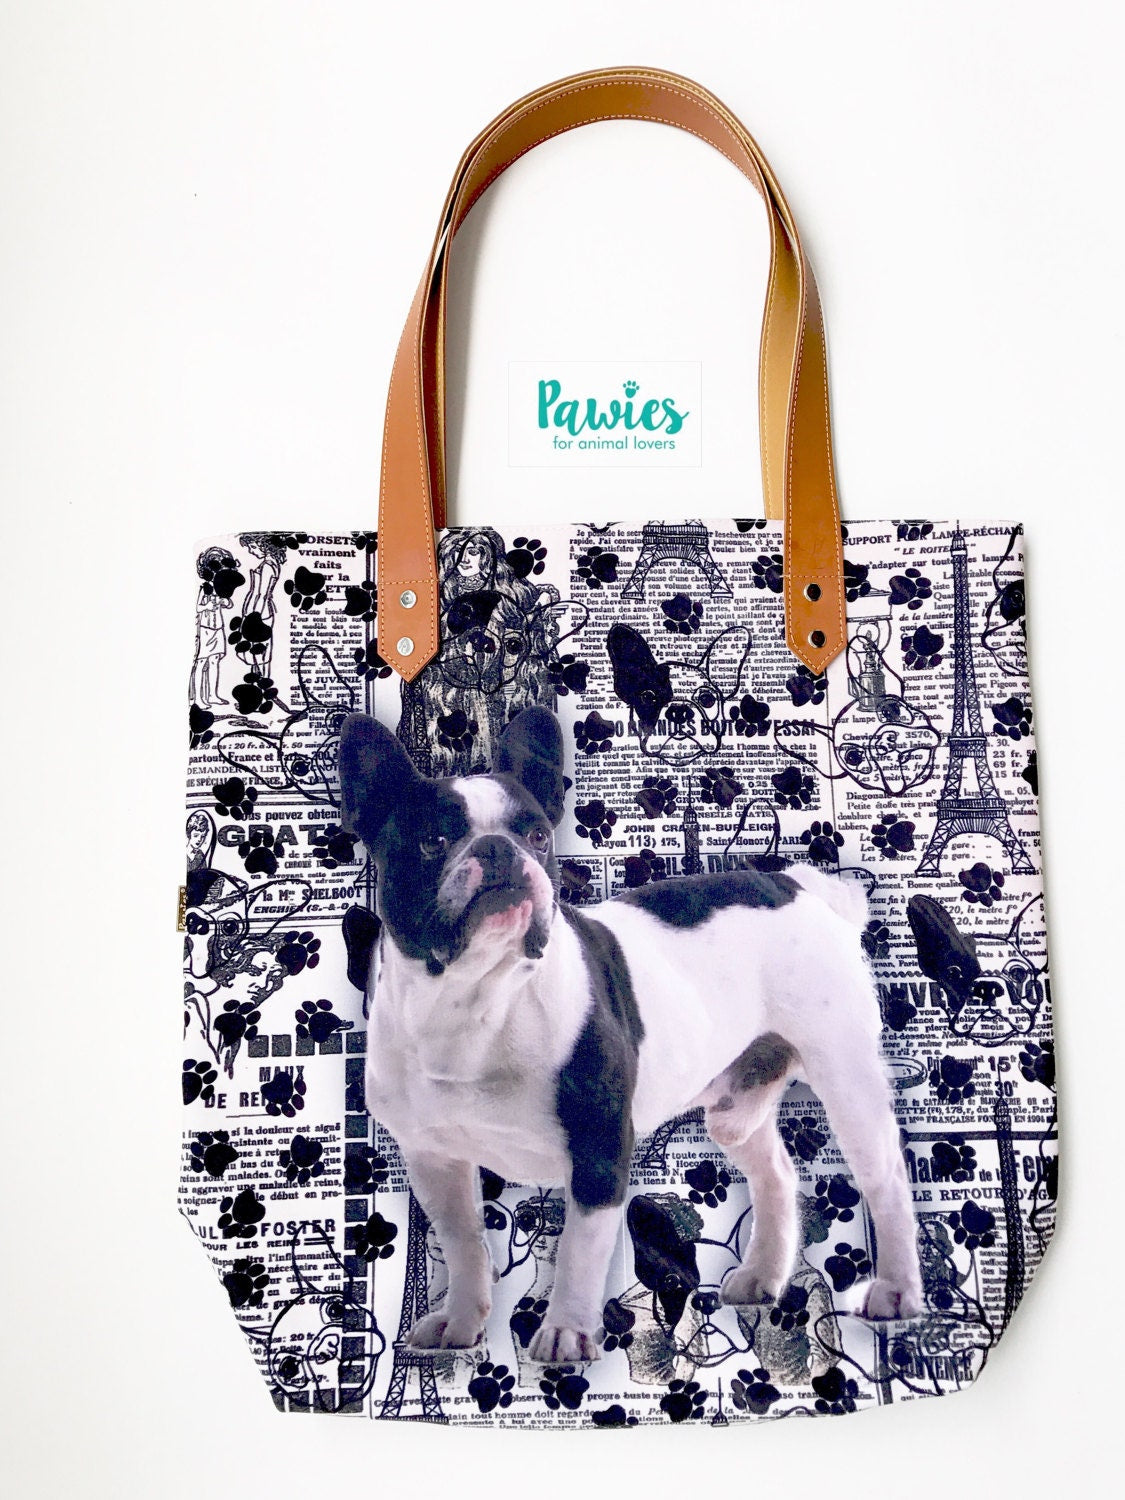 French Bulldog TOTE BAG !! Frenchie lover, tote bag, animal lovers, dog lovers.